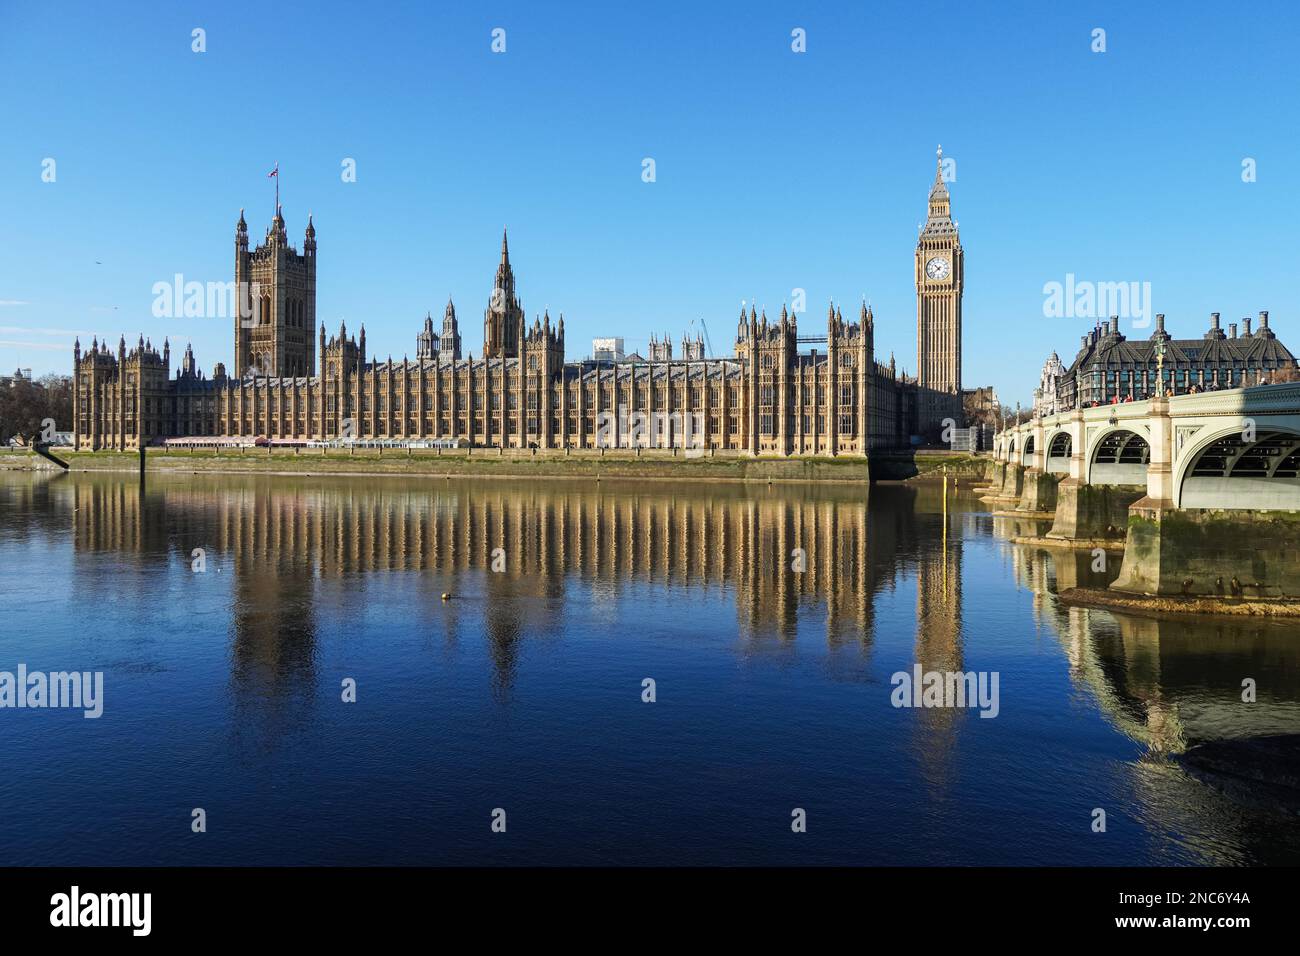 River Thames with Westminster Bridge, the Big Ben clock tower and the Palace of Westminster, London England United Kingdom UK Stock Photo